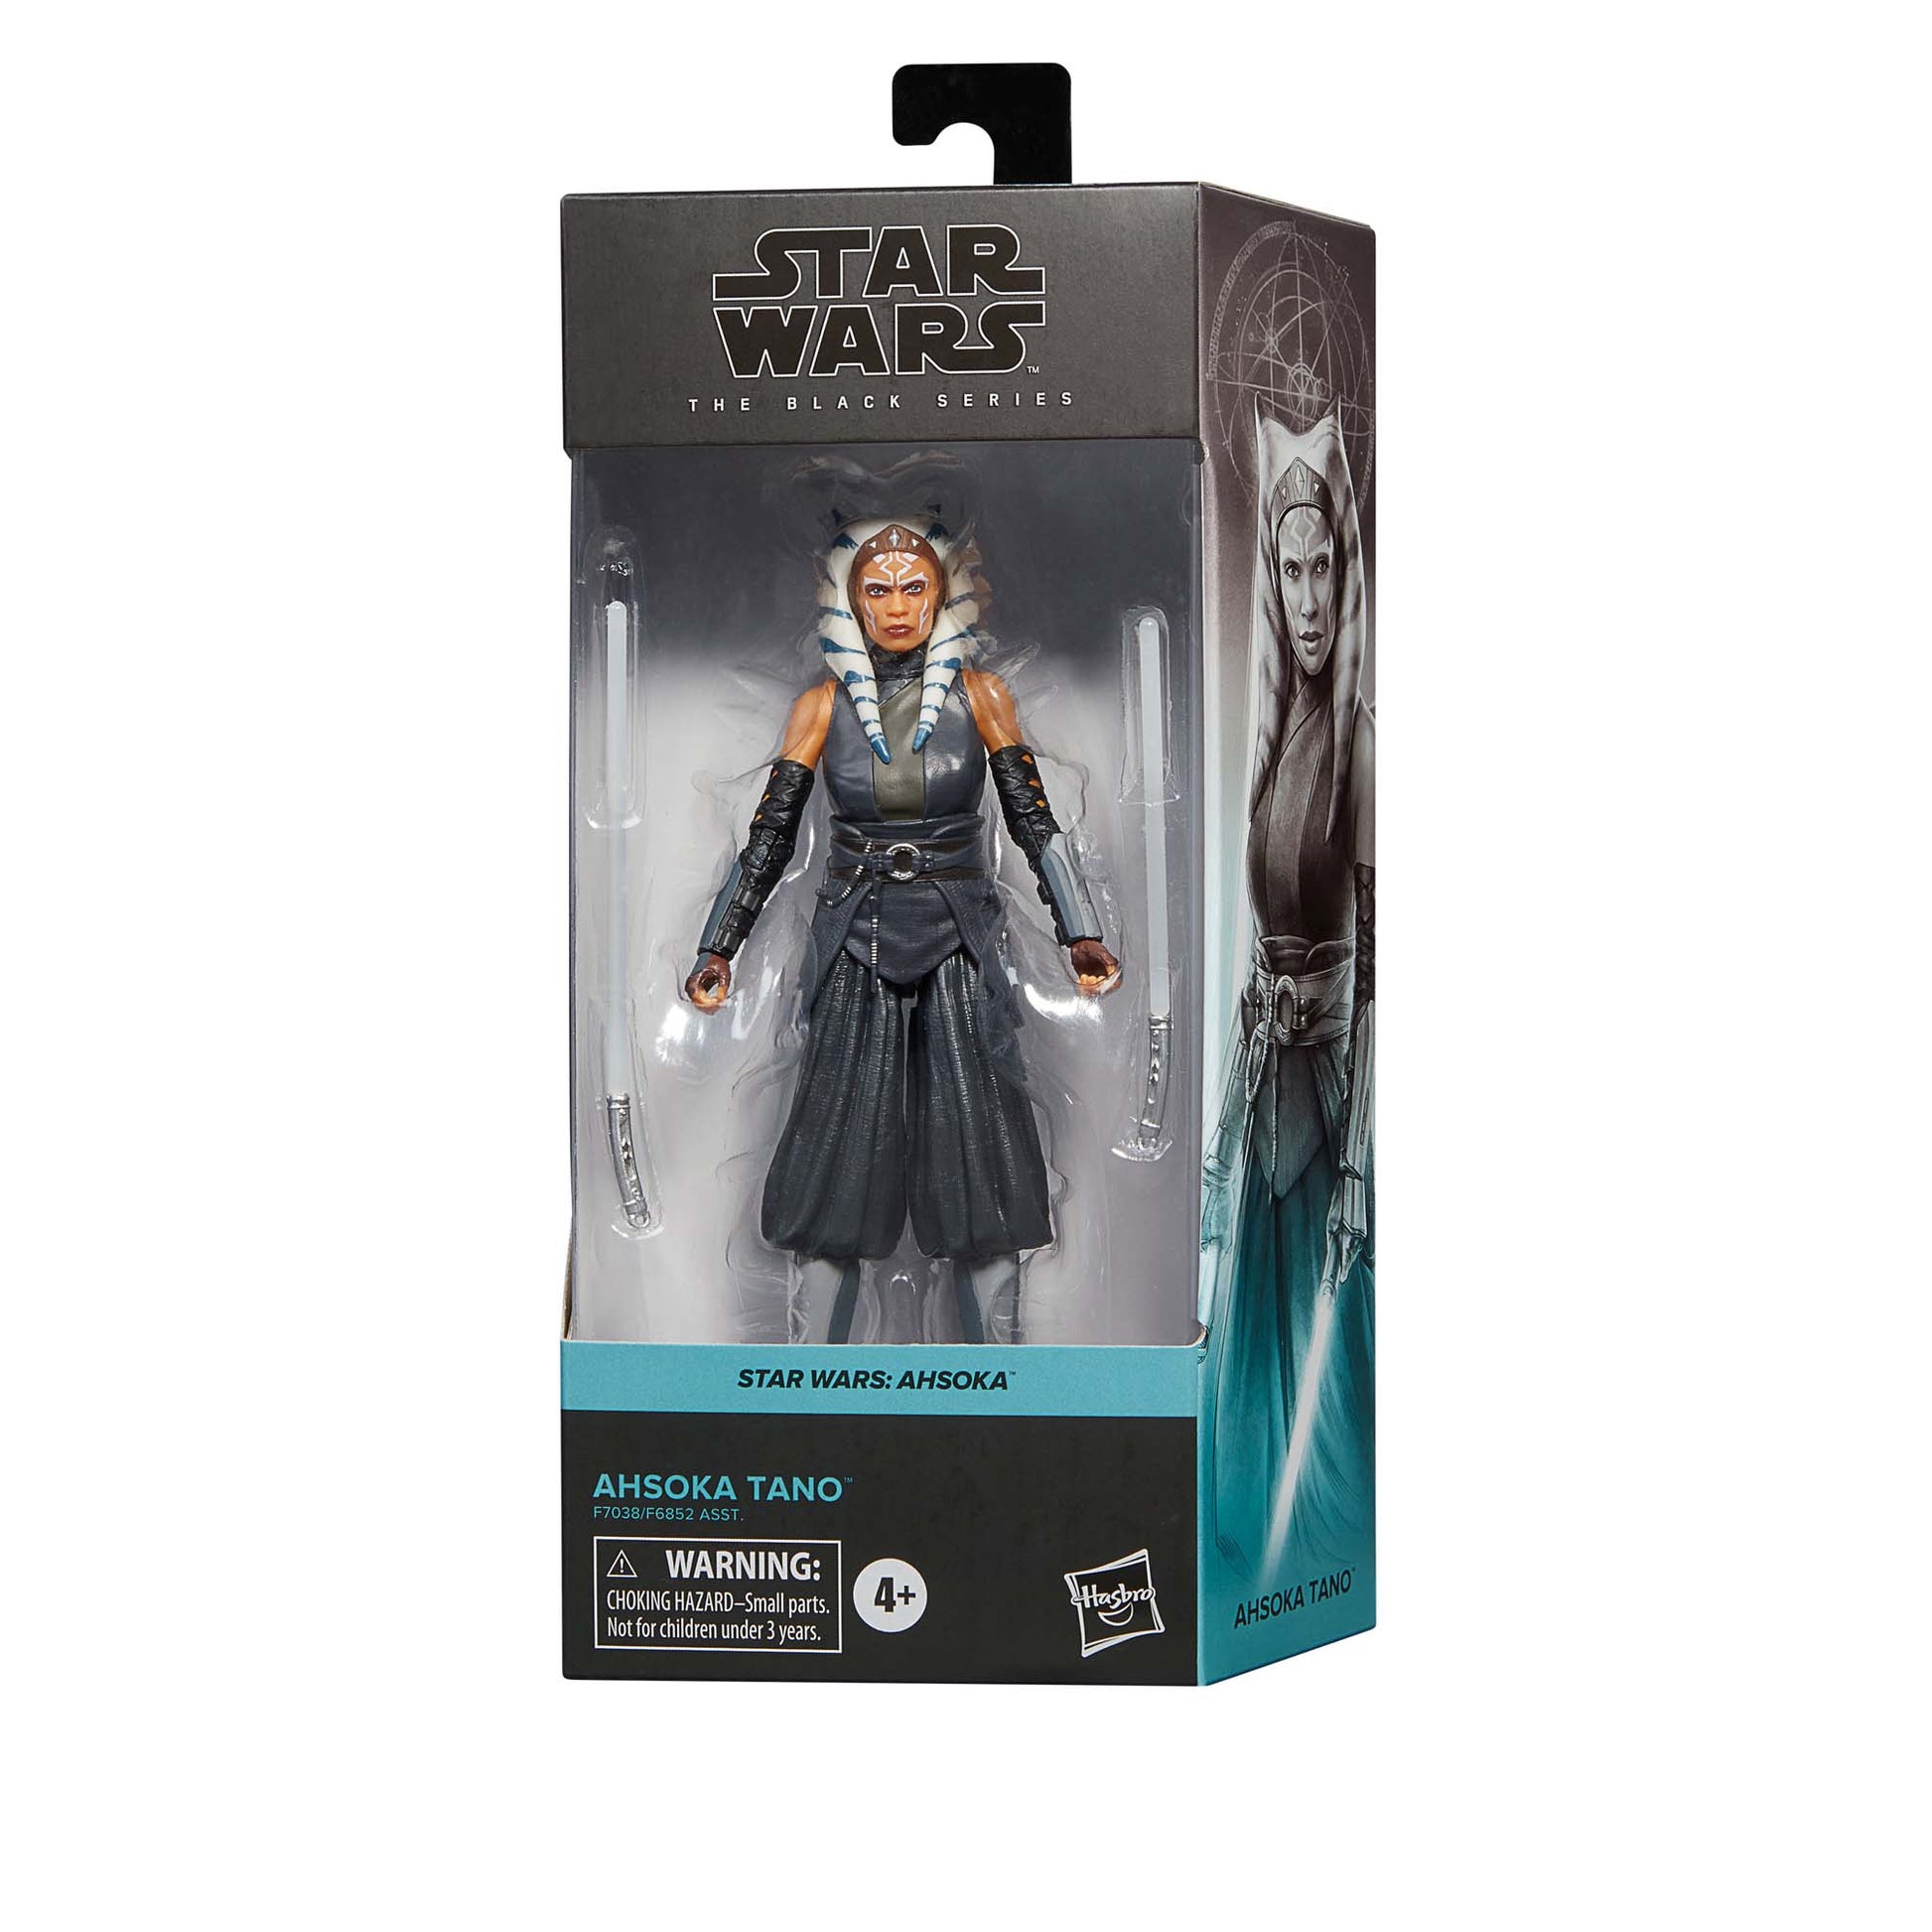 Star Wars The Black Series Ahsoka Tano Action Figure Toy in a package - Heretoserveyou